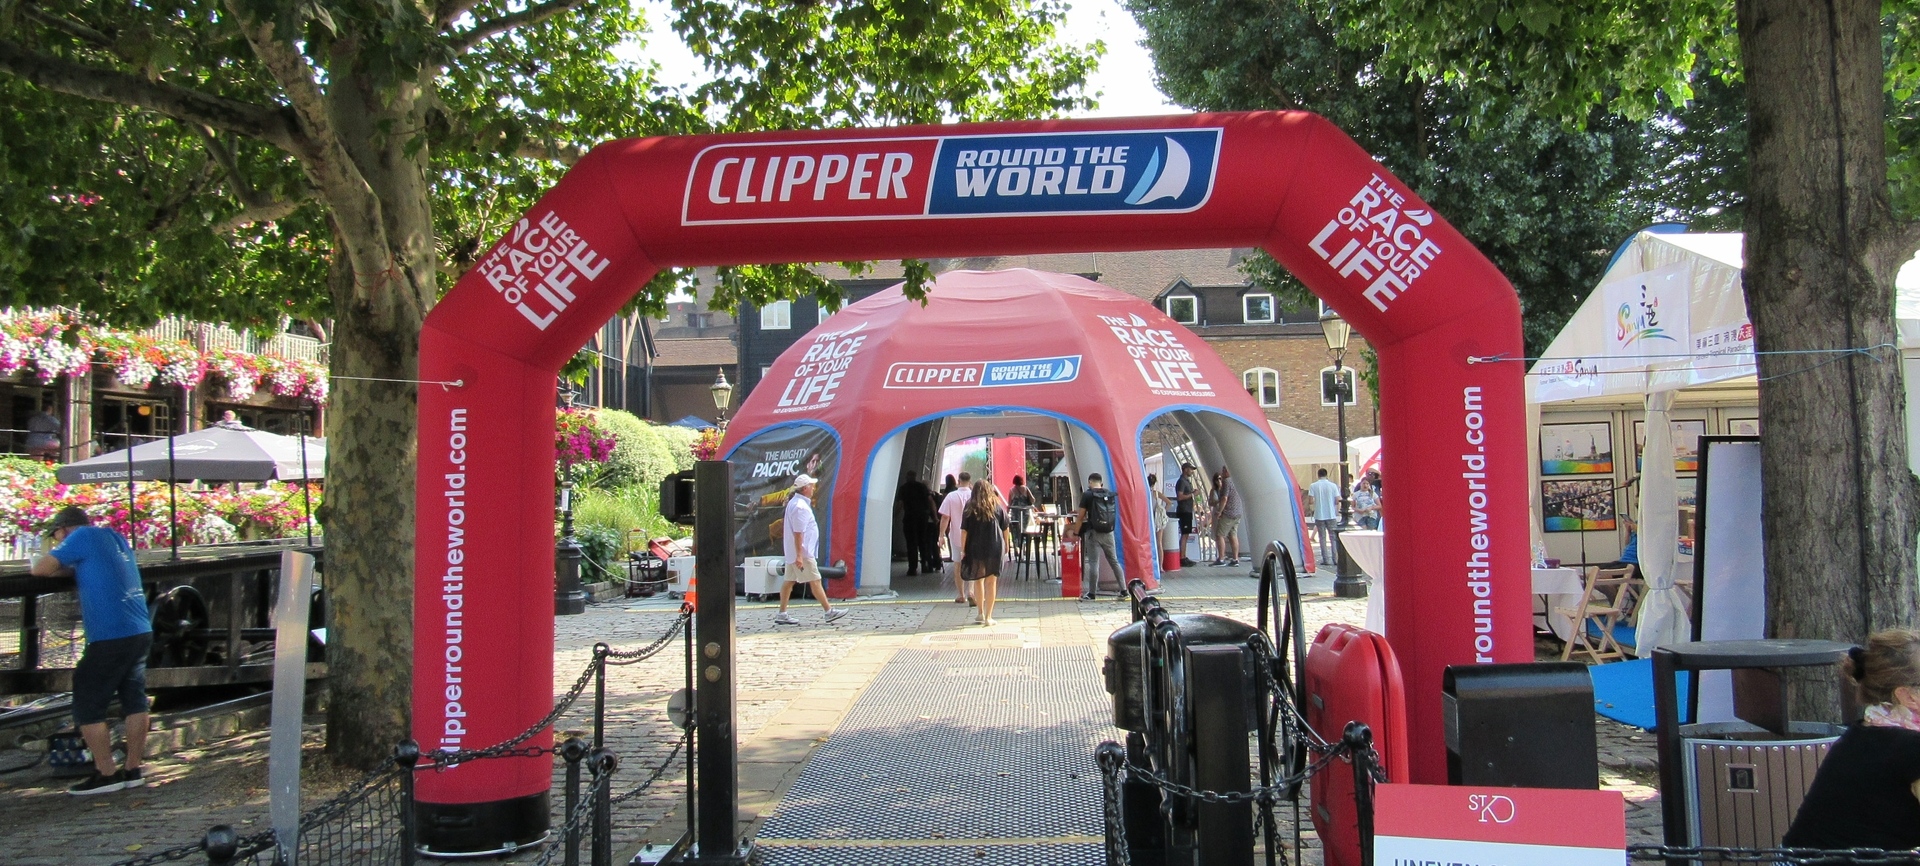 Inflatable Arch for Start/Finish Line at Sports Event from Inflatable Structures Ltd